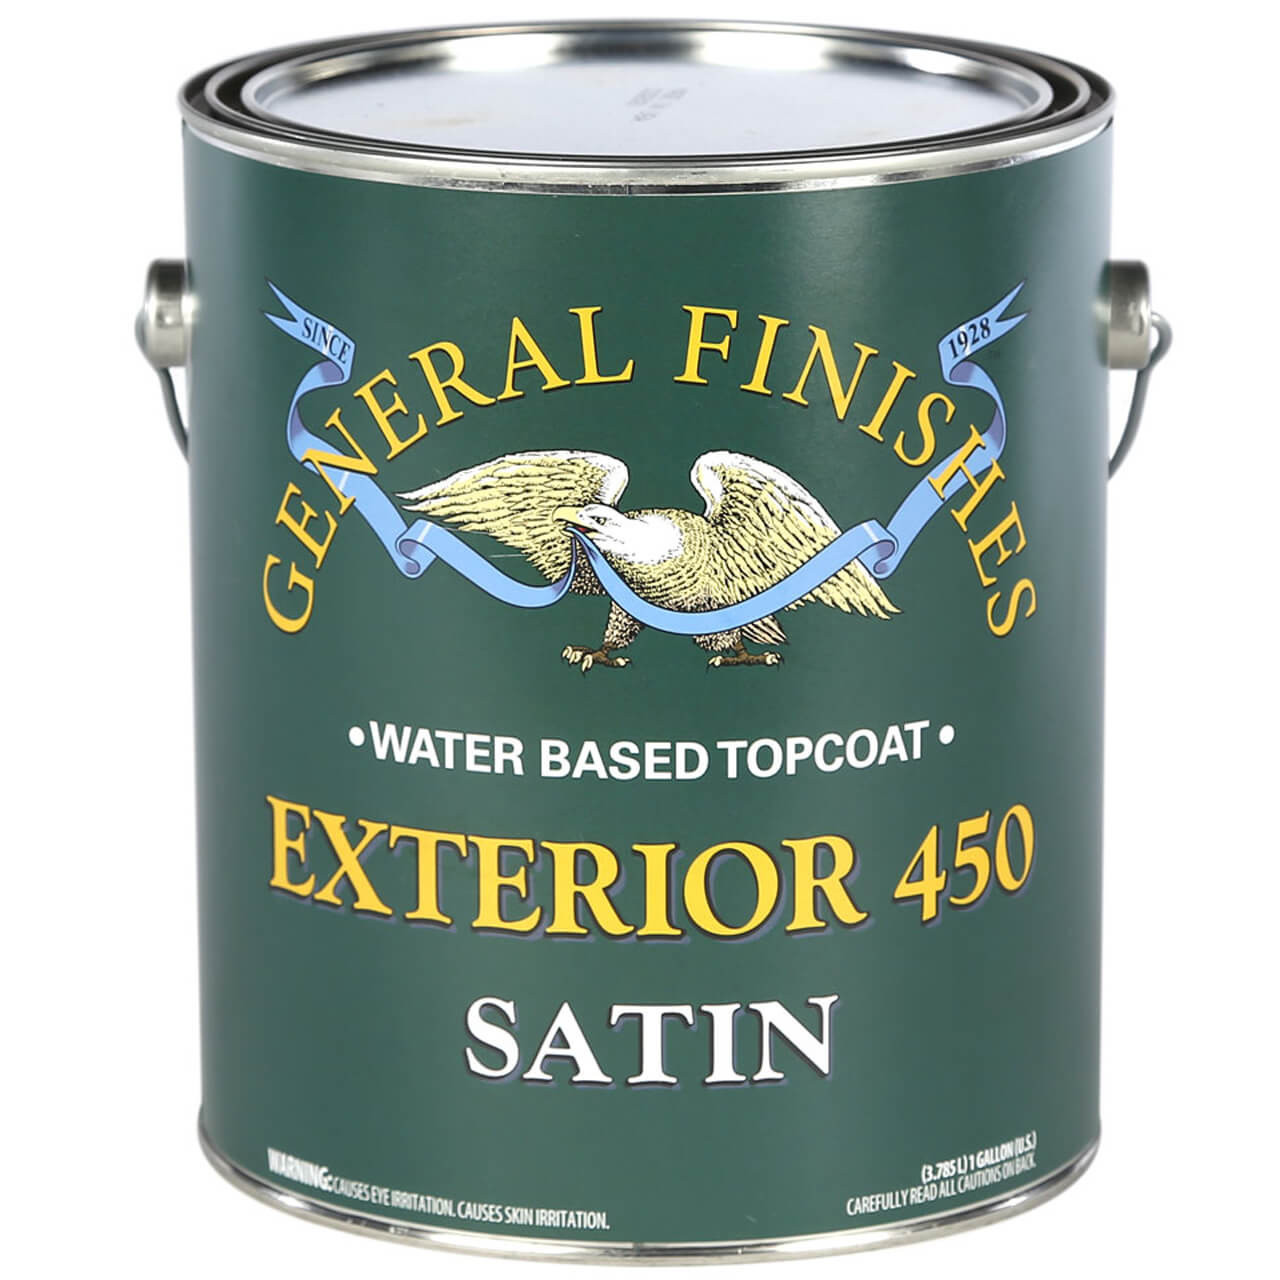 General Finishes Water Based Exterior 450 Outdoor Finish, Satin, Gallon